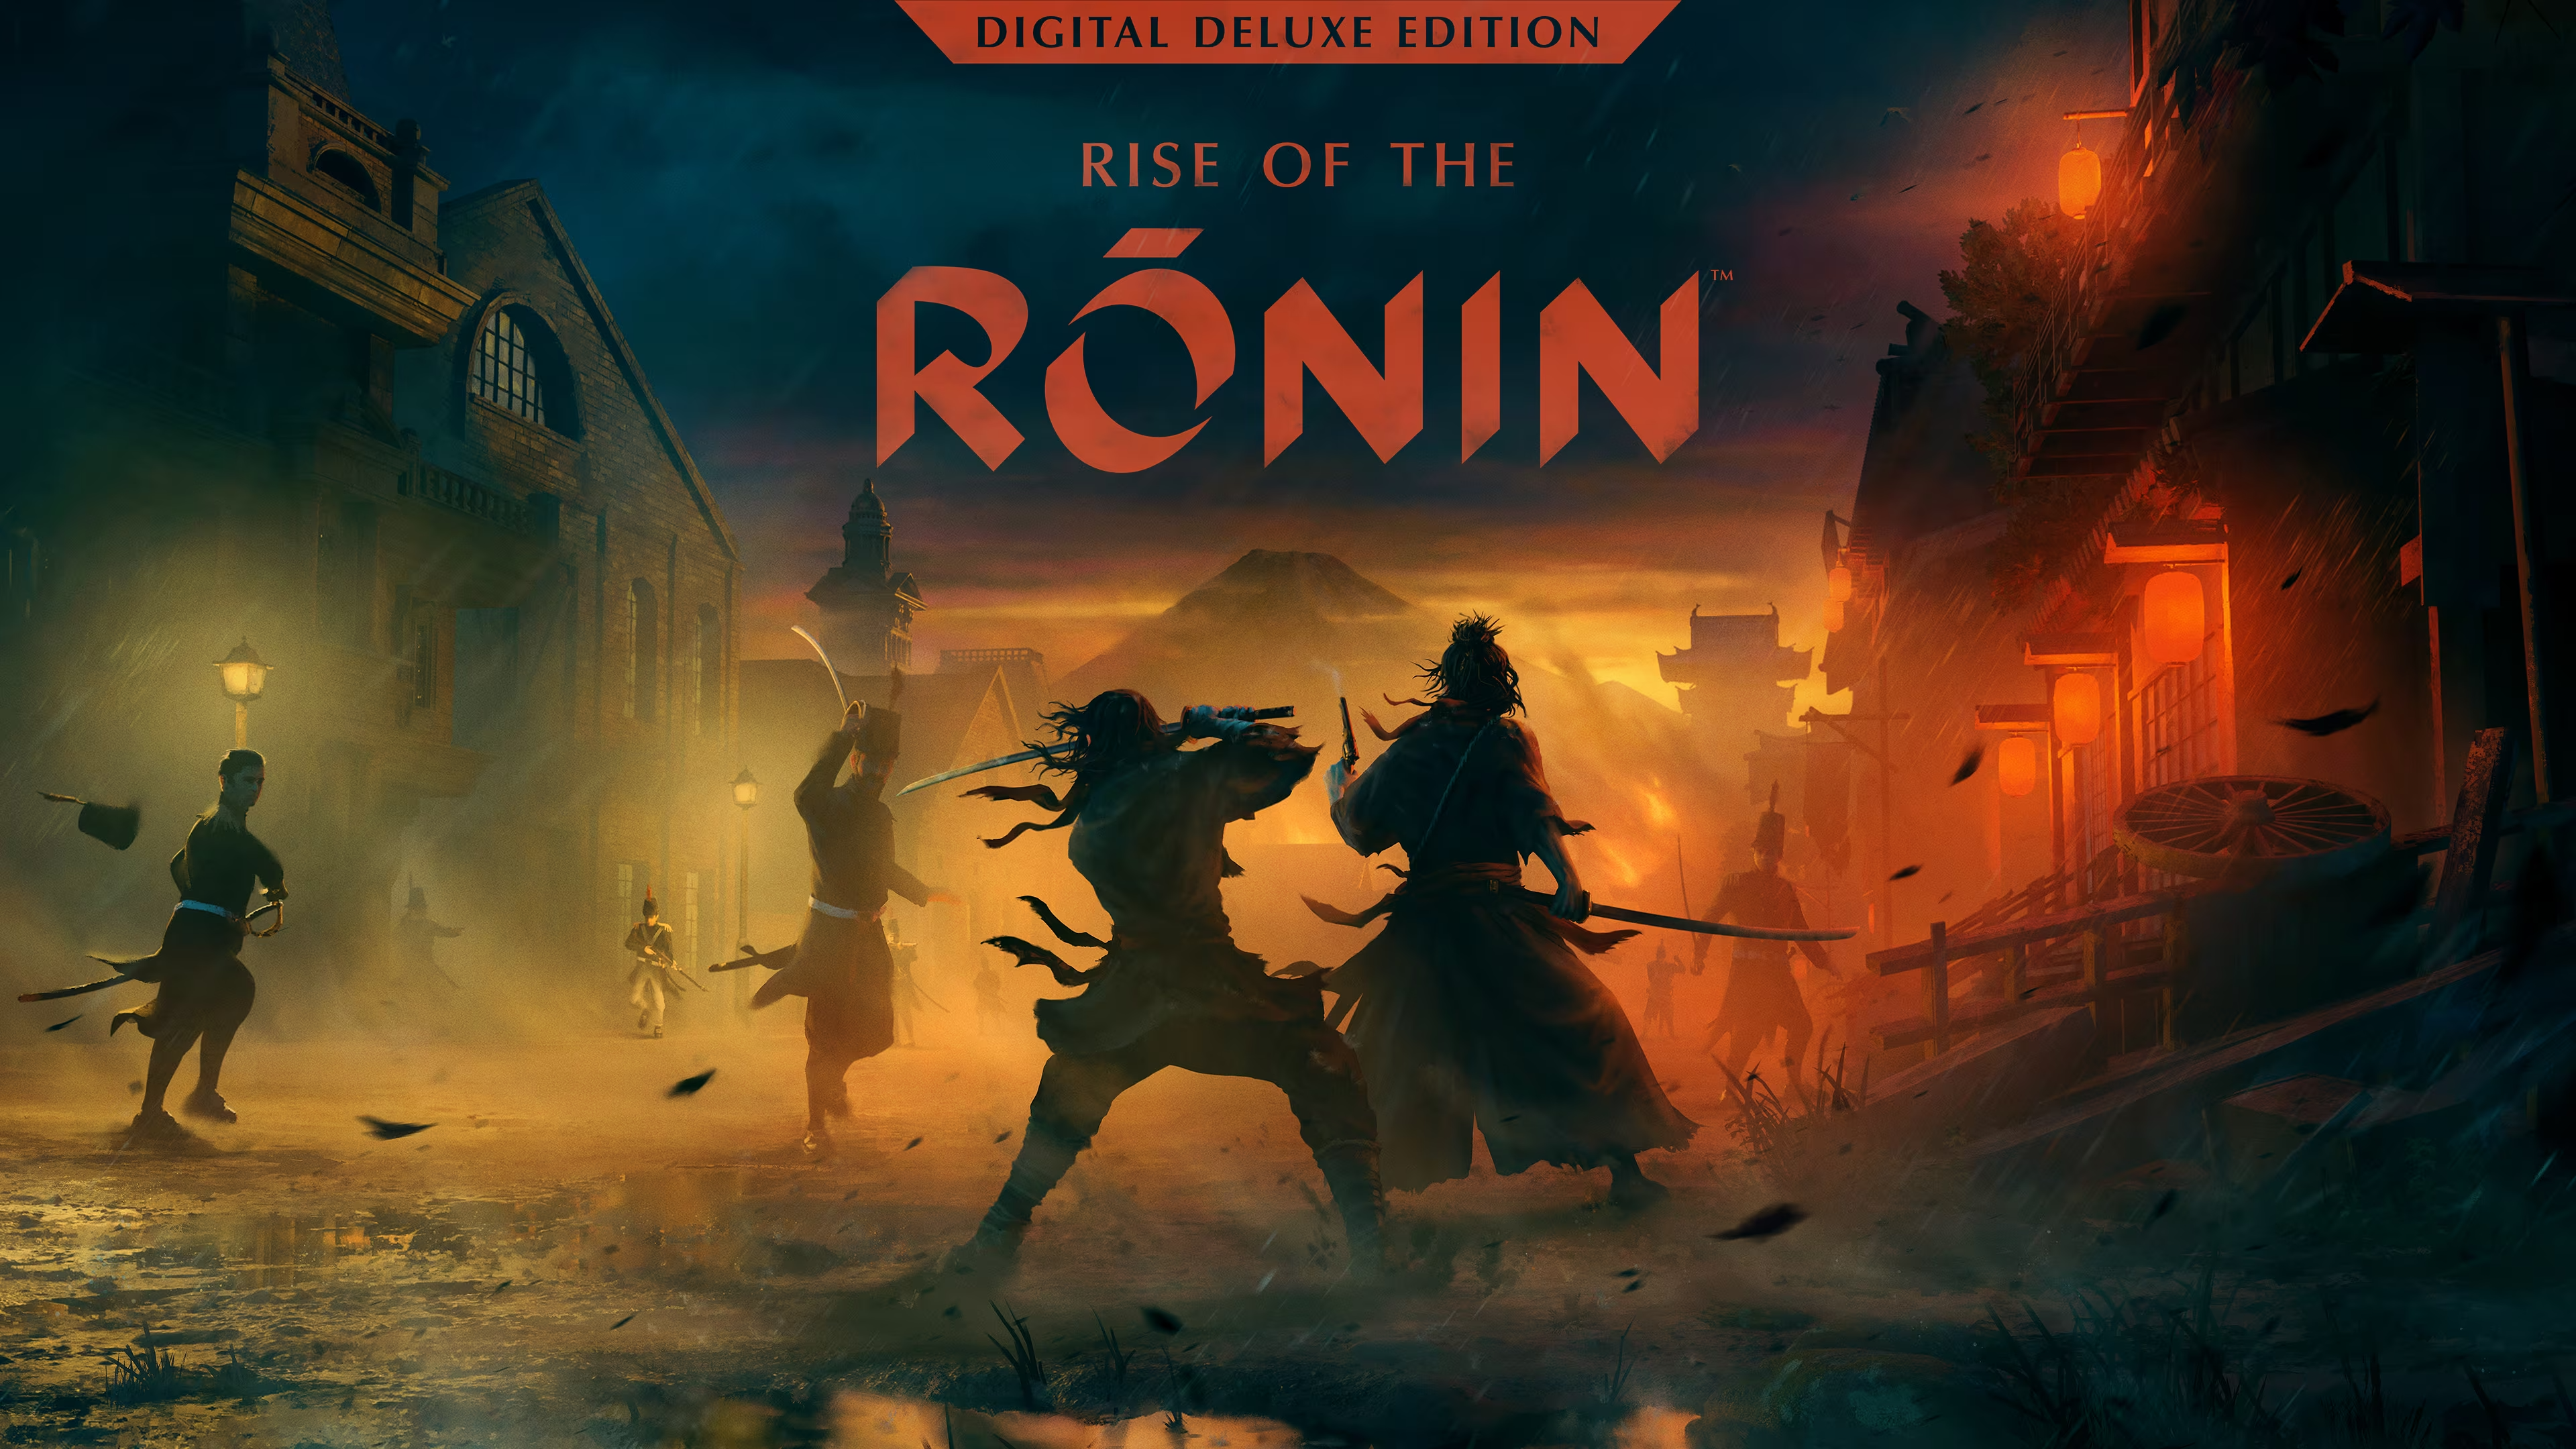 Rise of the Ronin developers told about the game's factions